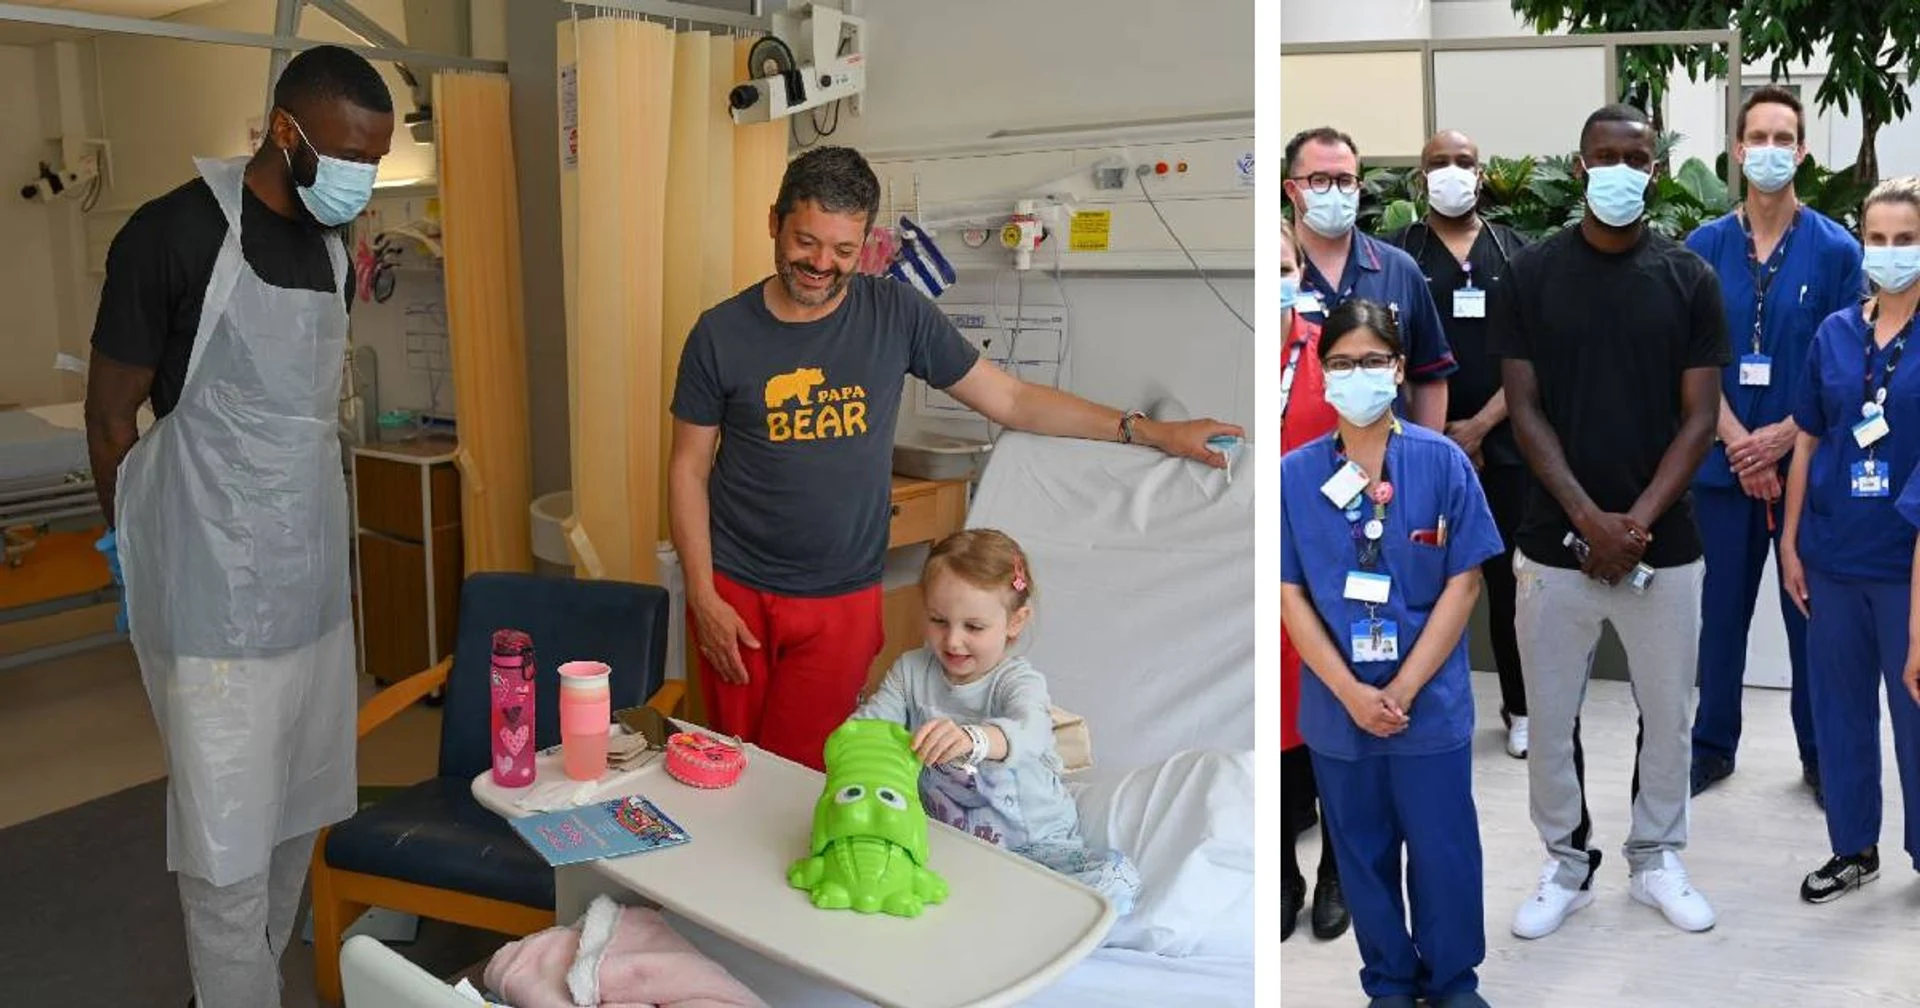 Chelsea star bids farewell to patients and staff at Westminster Hospital ahead of Madrid move